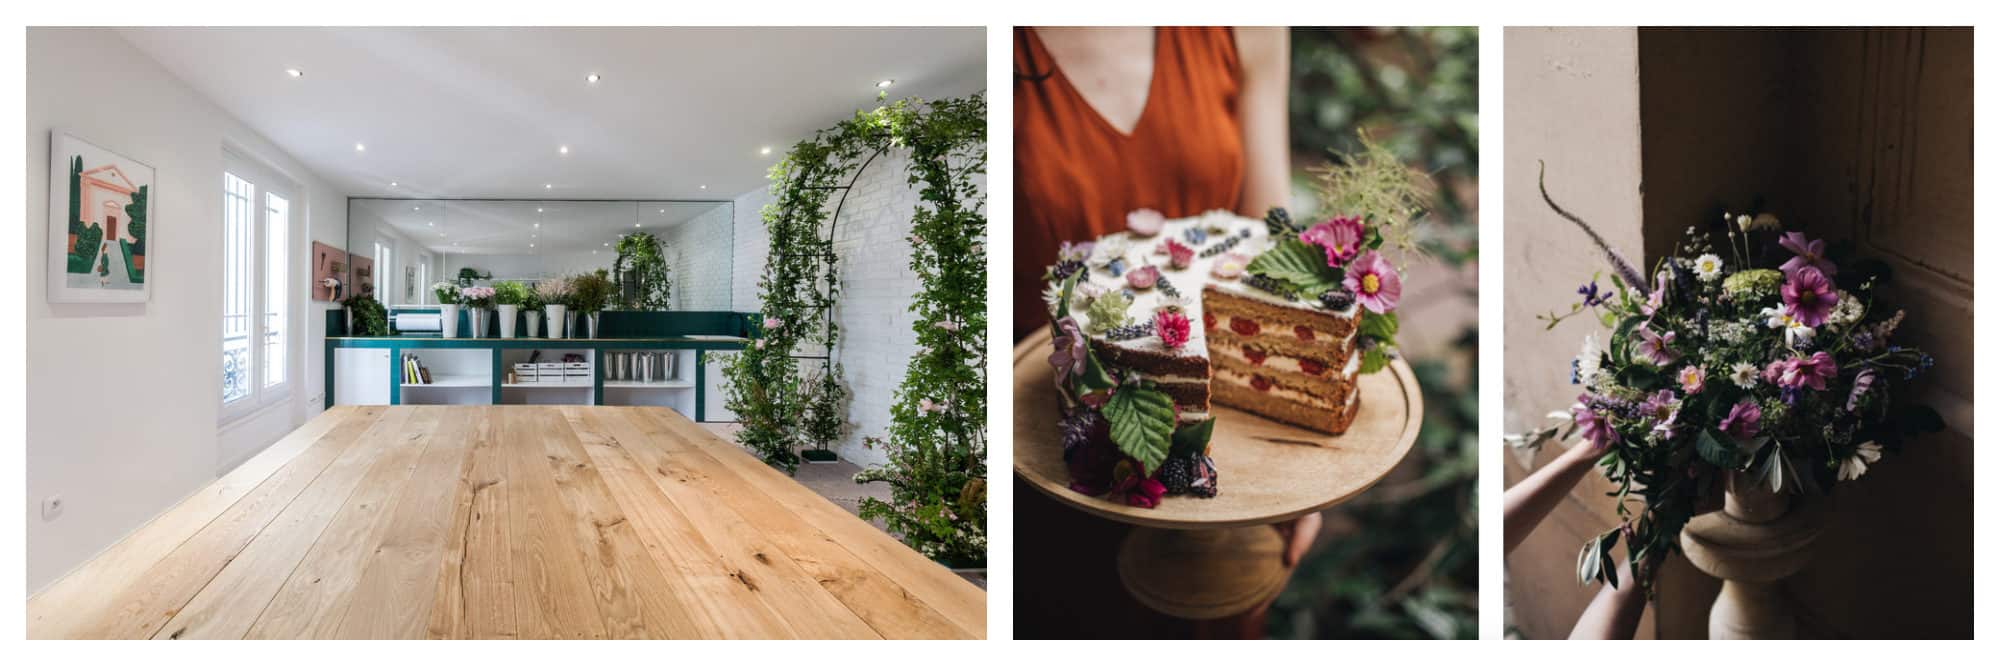 Alternative co-working spaces in Paris include Peonies coffee shop for its soothing flowery decor (left) and flower creations (right).